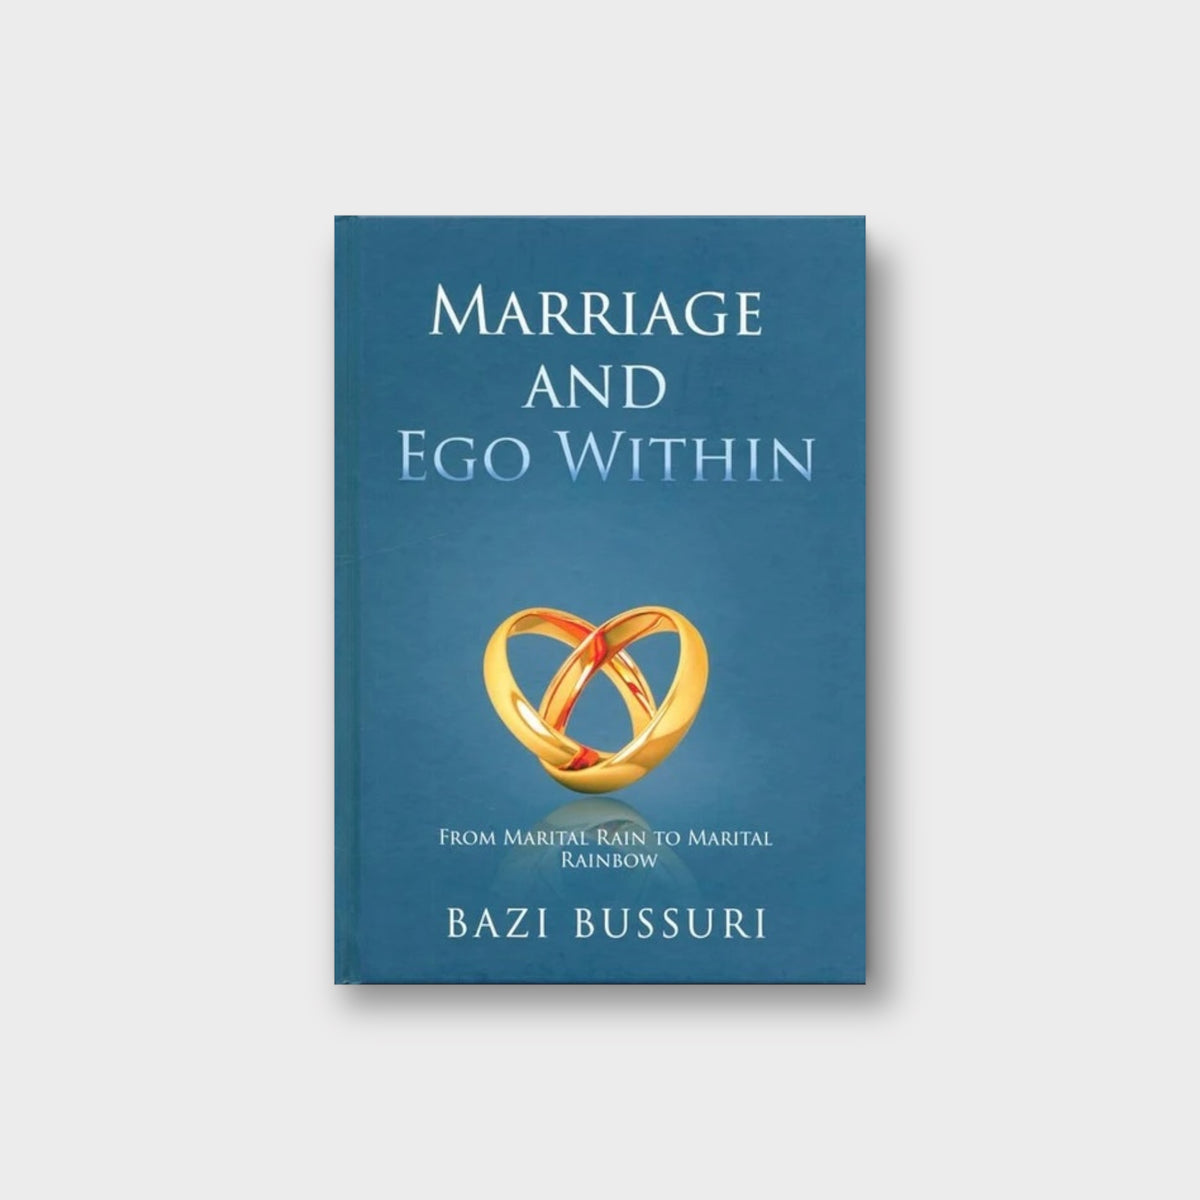 Marriage and Ego